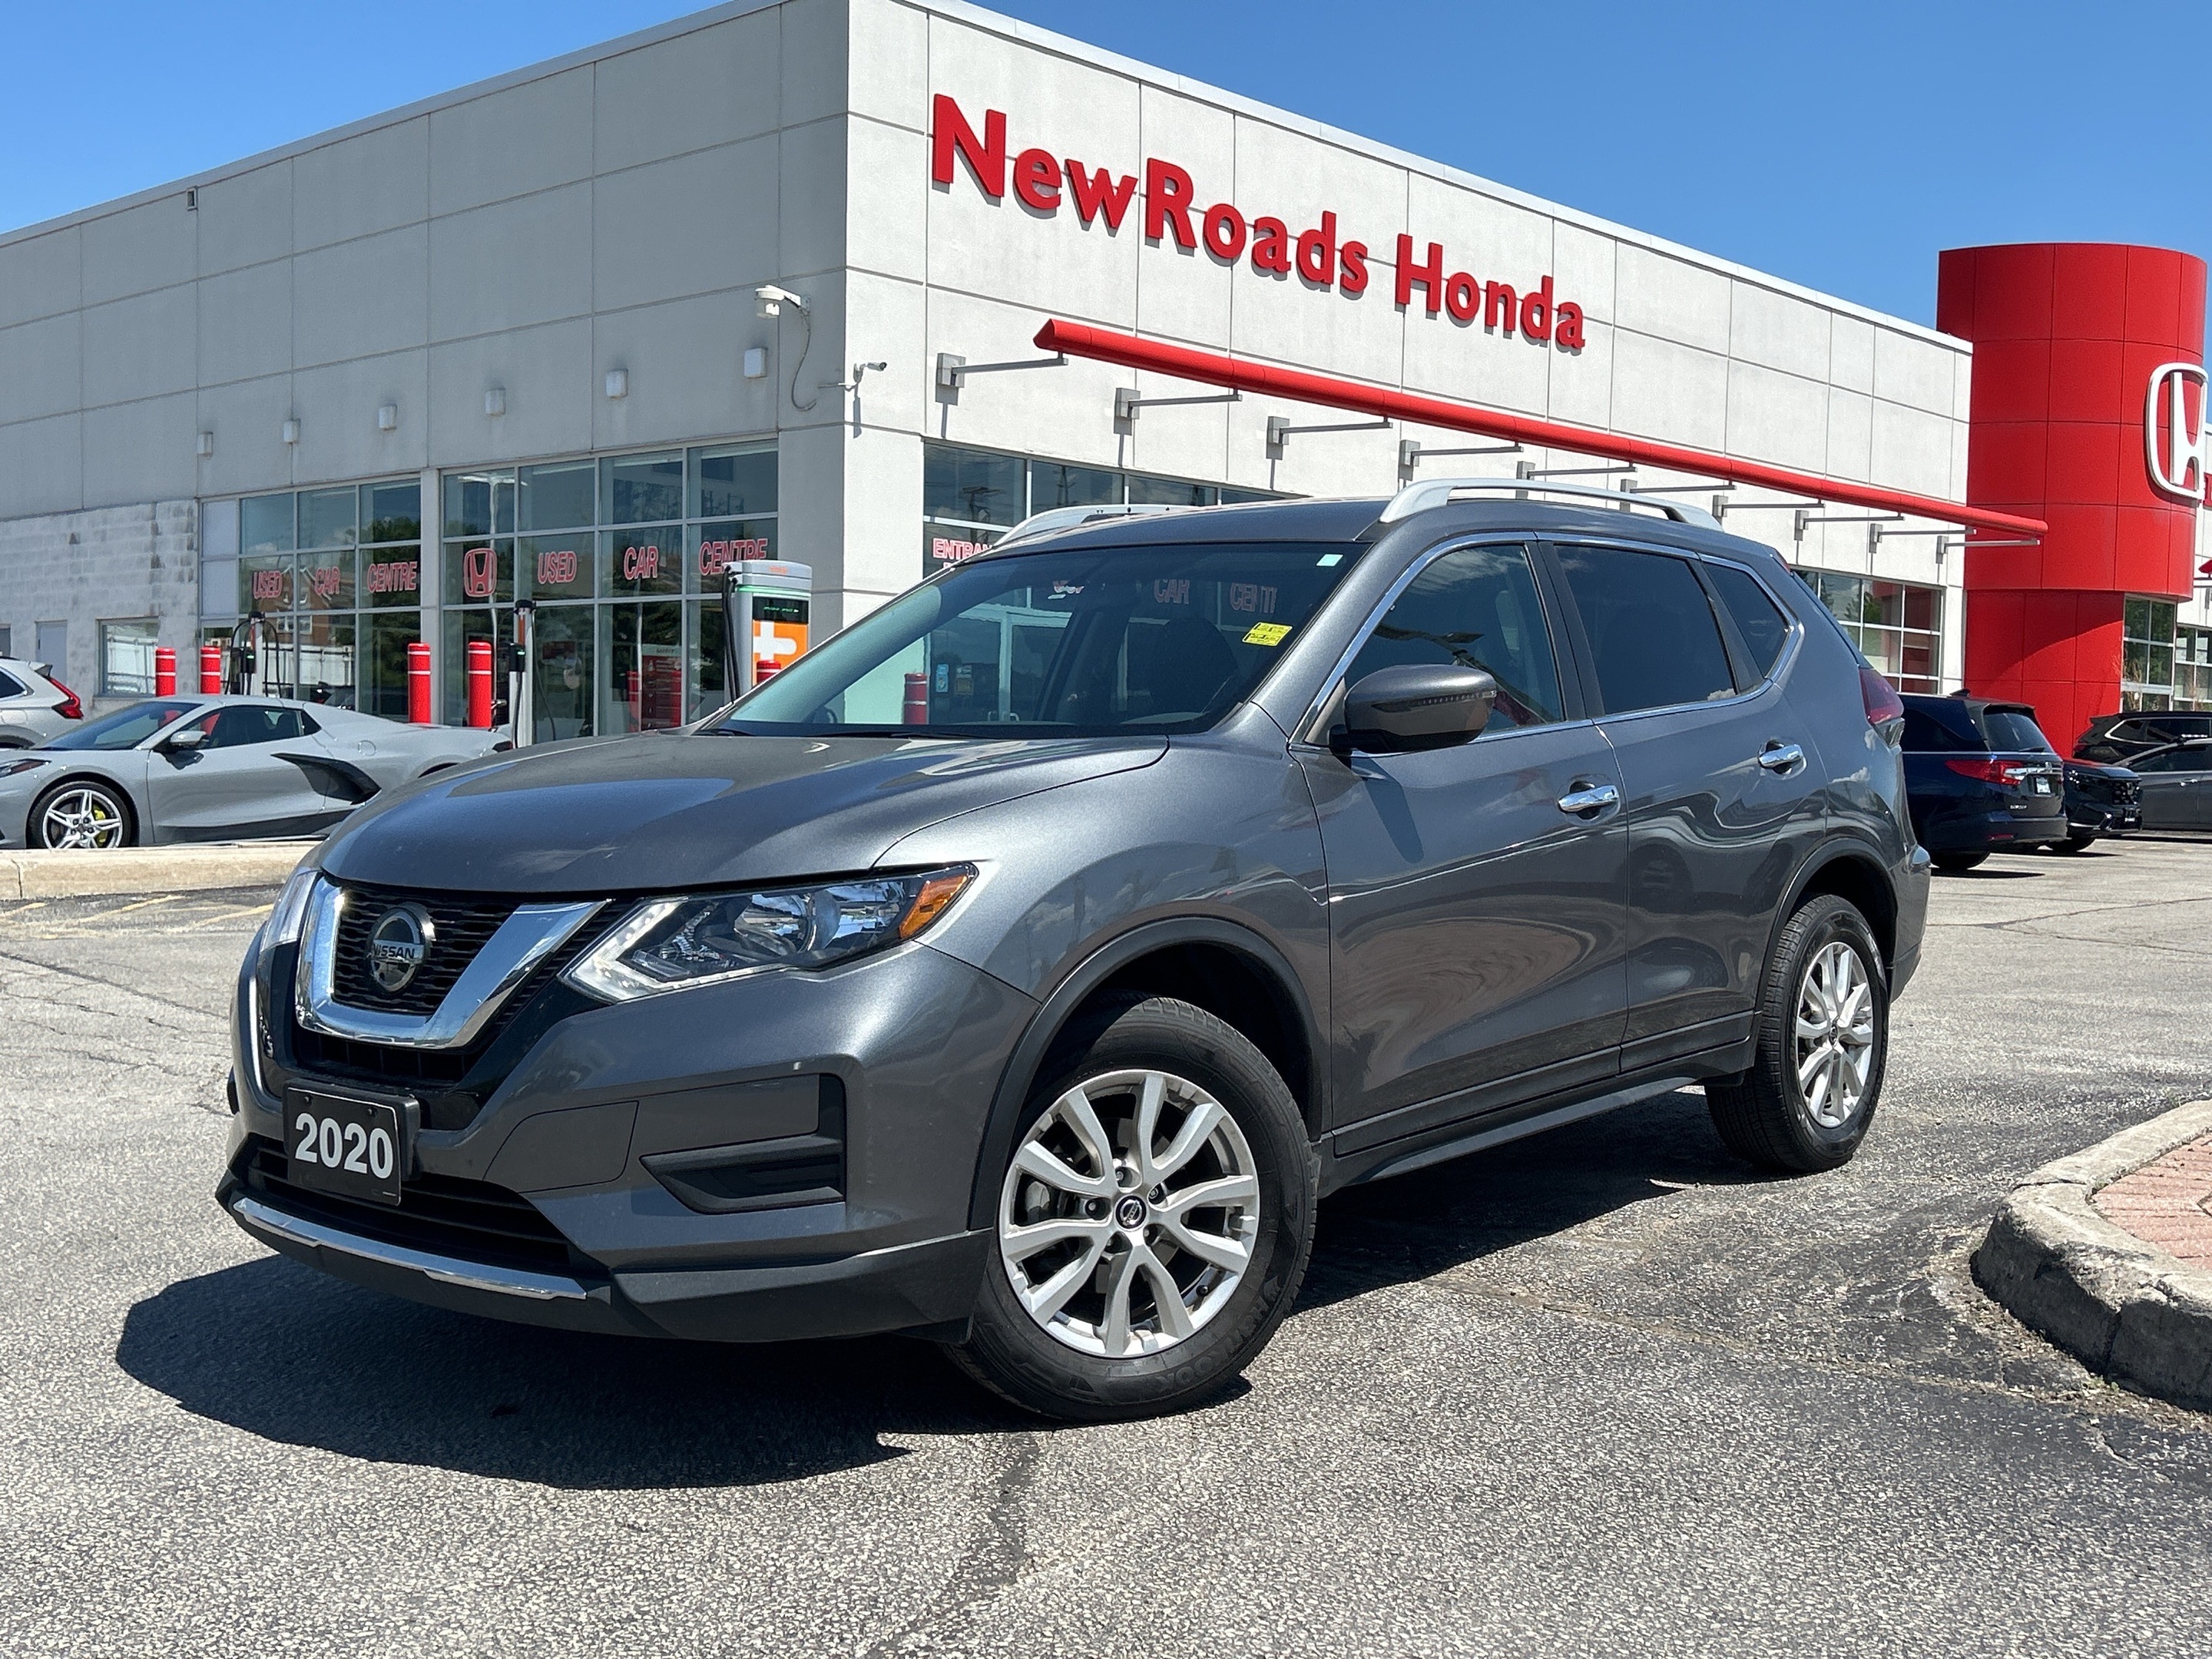 2020 Nissan Rogue Low Kms, One Owner, Great Shape